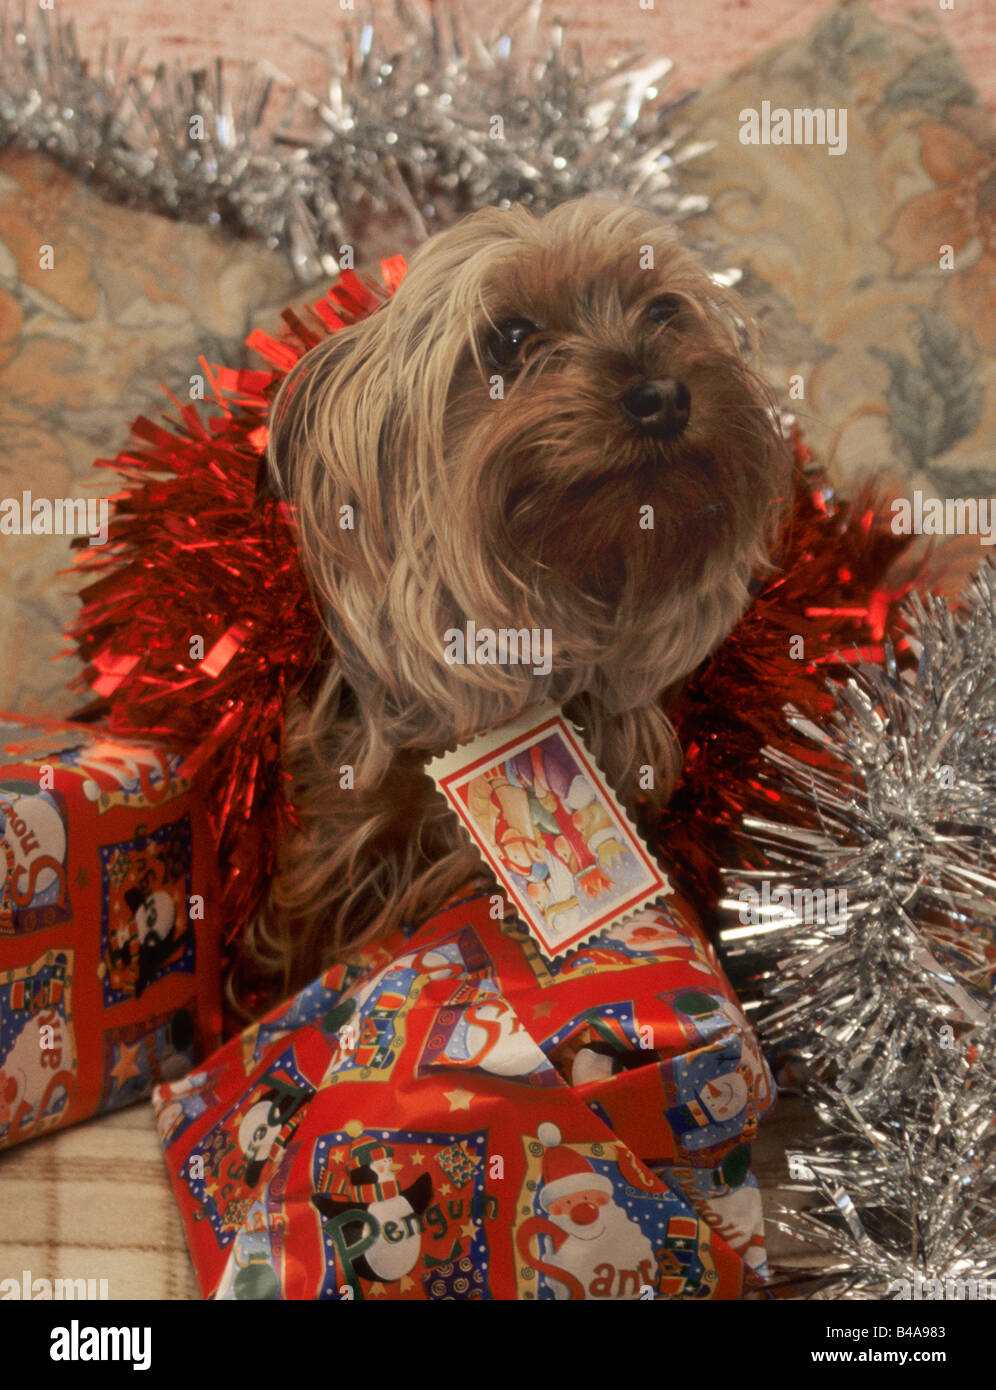 yorkshire terrier dog surrounded by lots of tinsel at Christmas time with plenty of presents Stock Photo